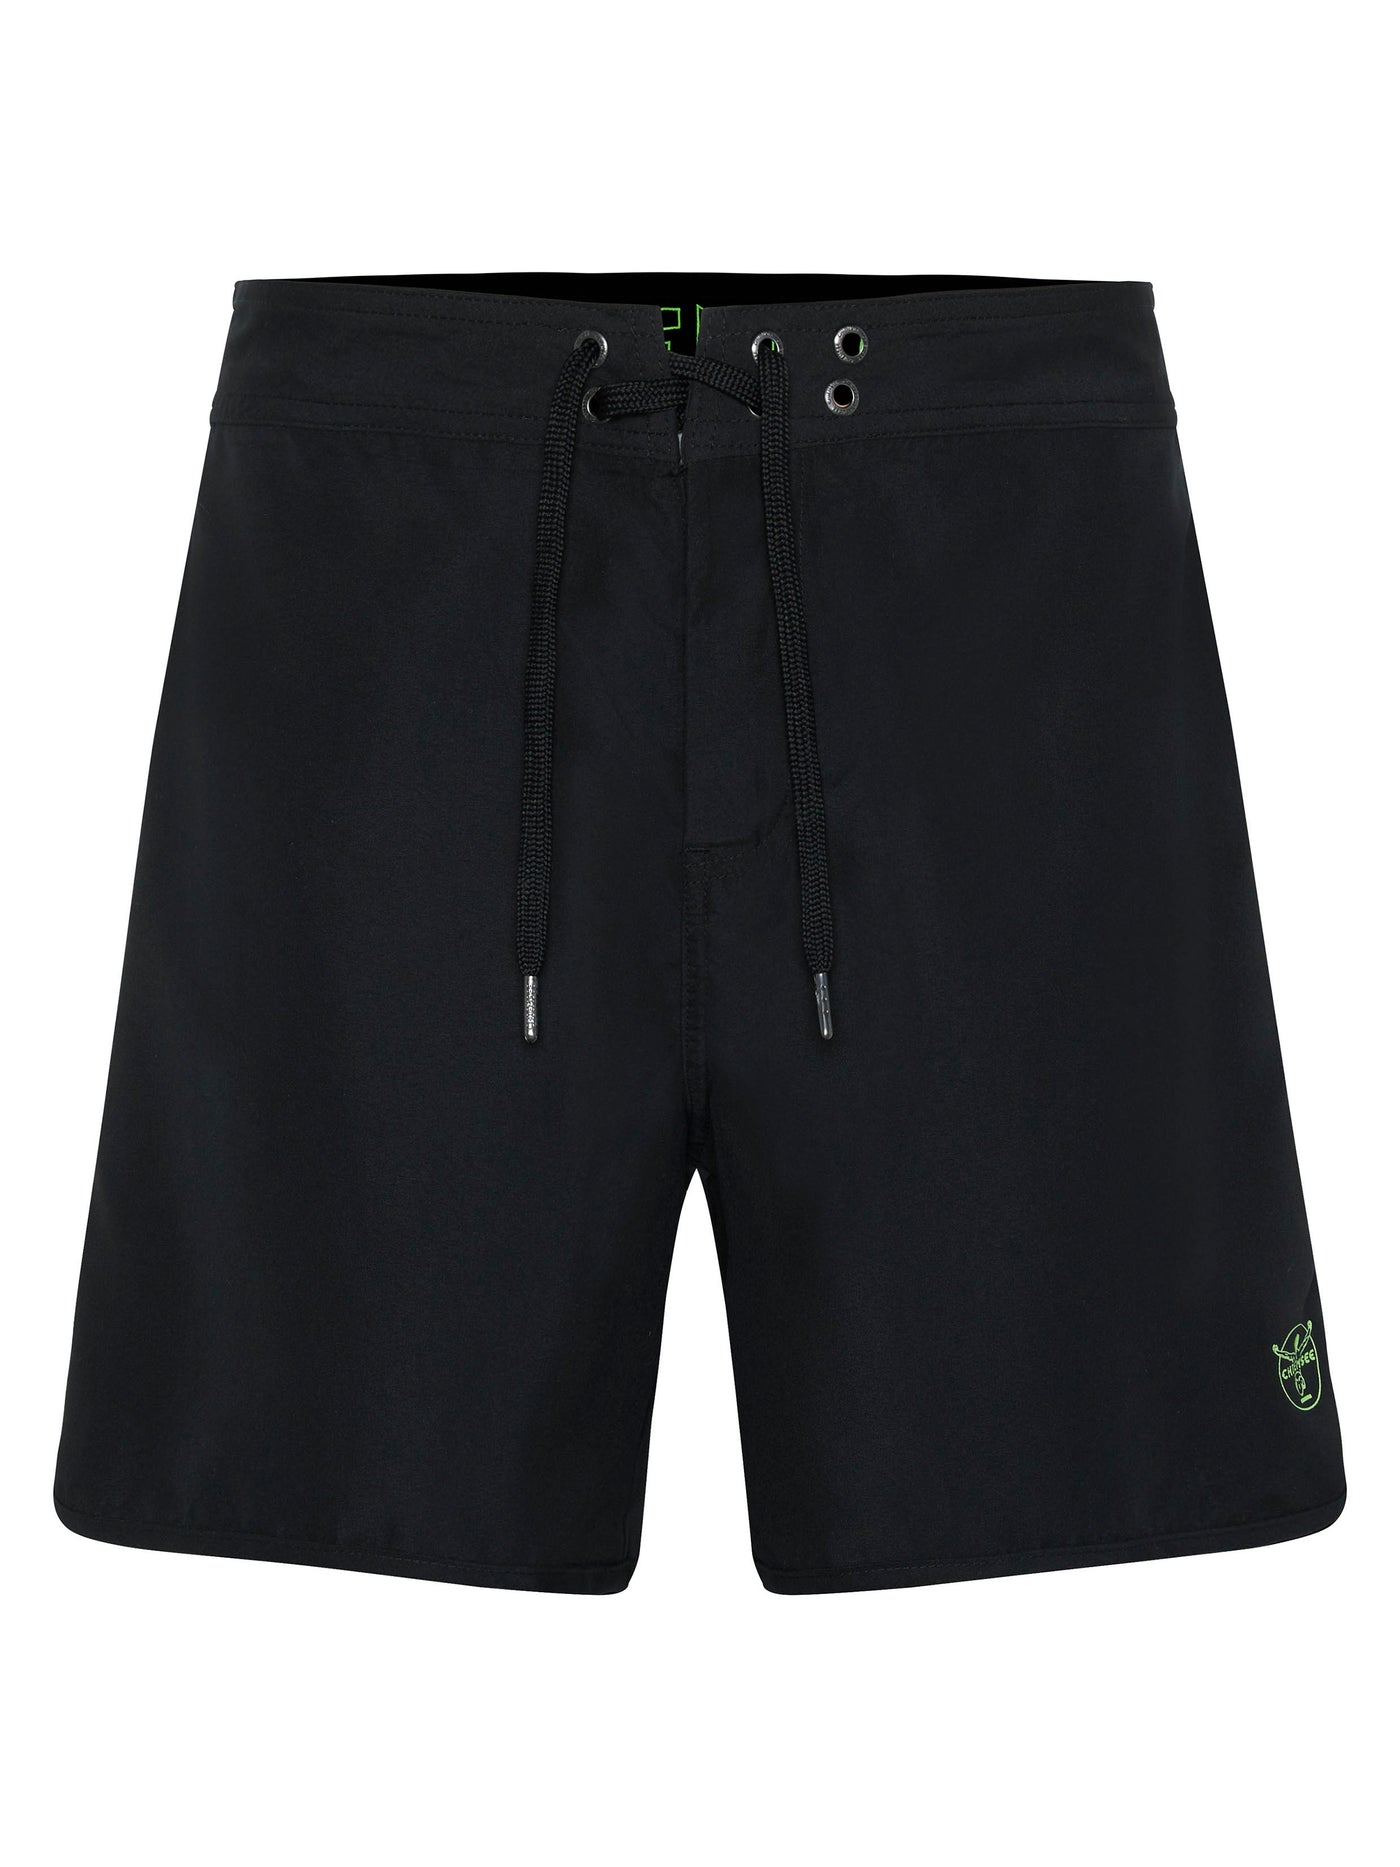 MBRC x Chiemsee Boardshort